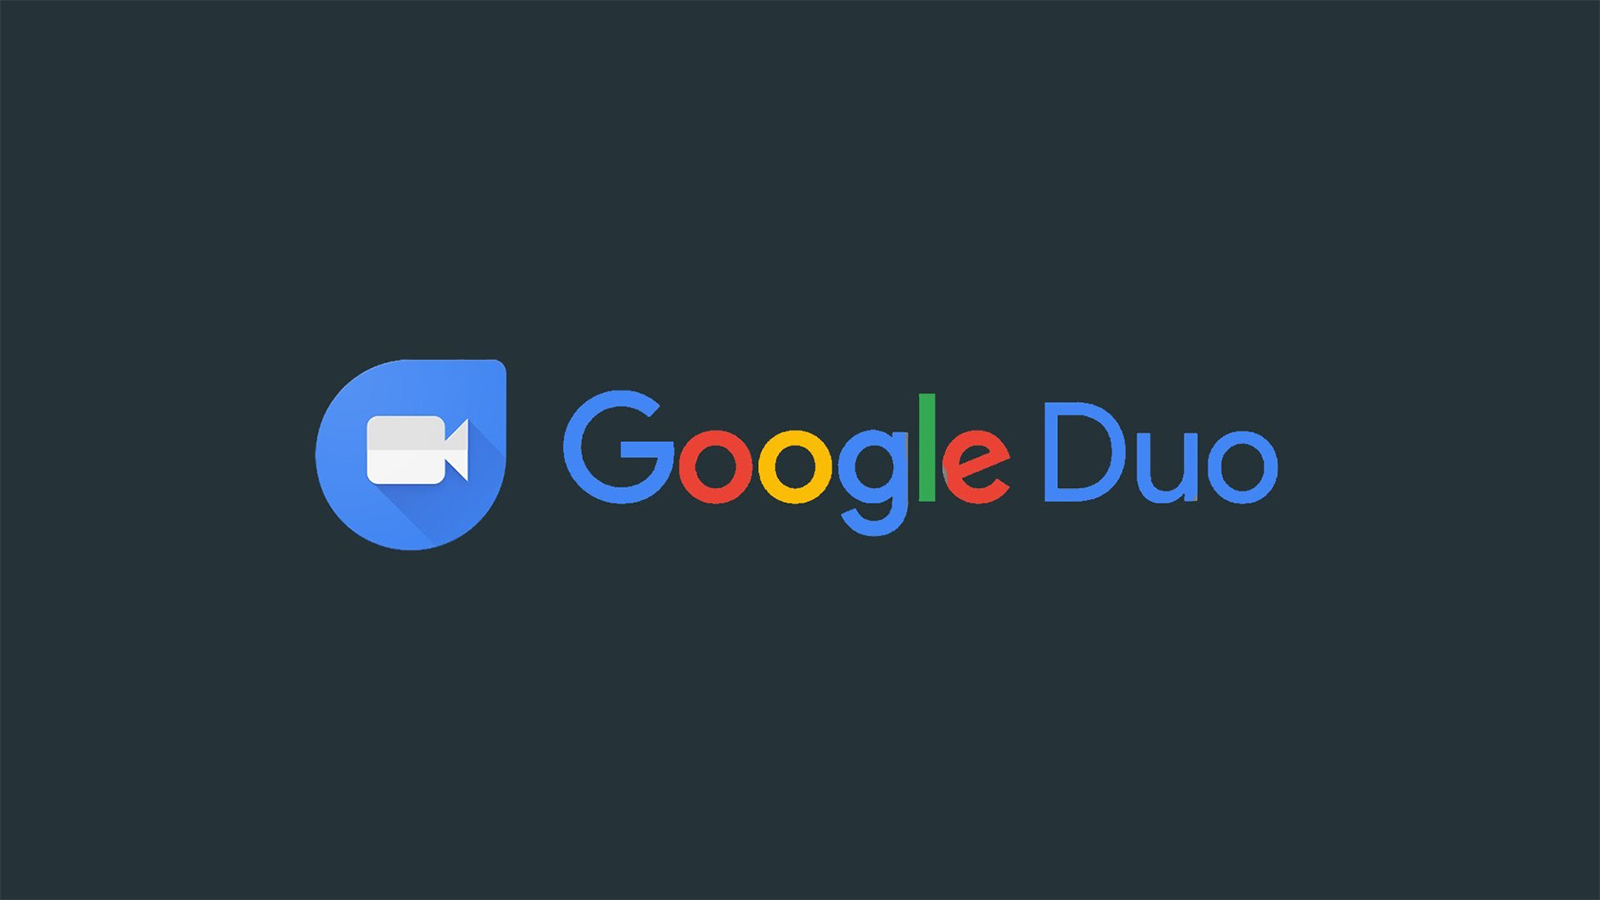 google duo for windows download